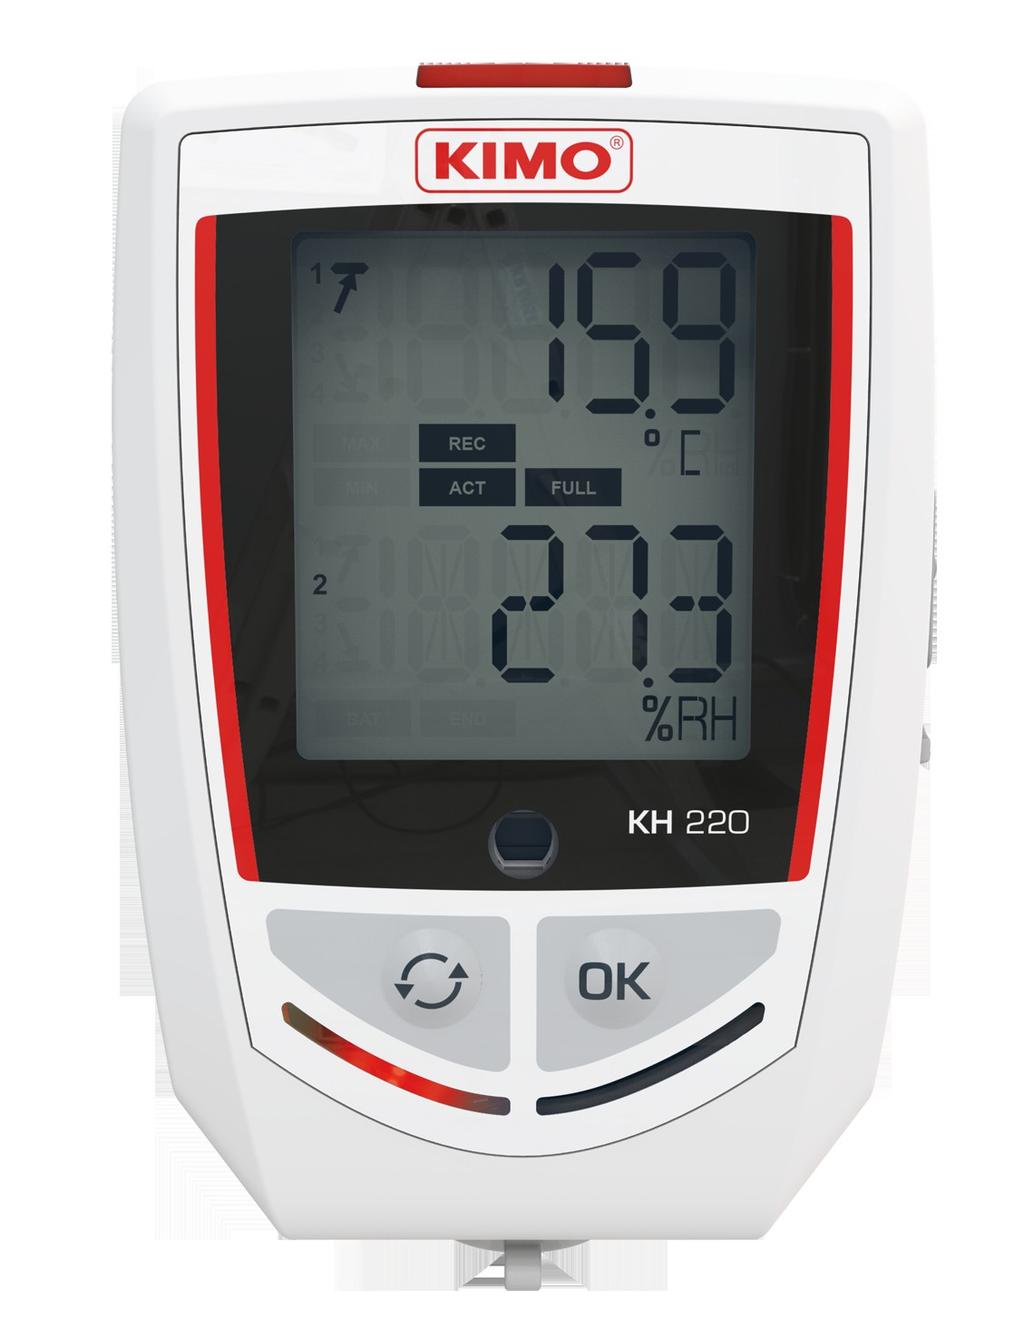 parameters simultaneously 2 configurable setpoint alarms for each channel 2 lines LCD screen Magnetic mounting REFERENCES Device reference Internal sensor Display KT 220 - O Yes KT 220 - N No KH